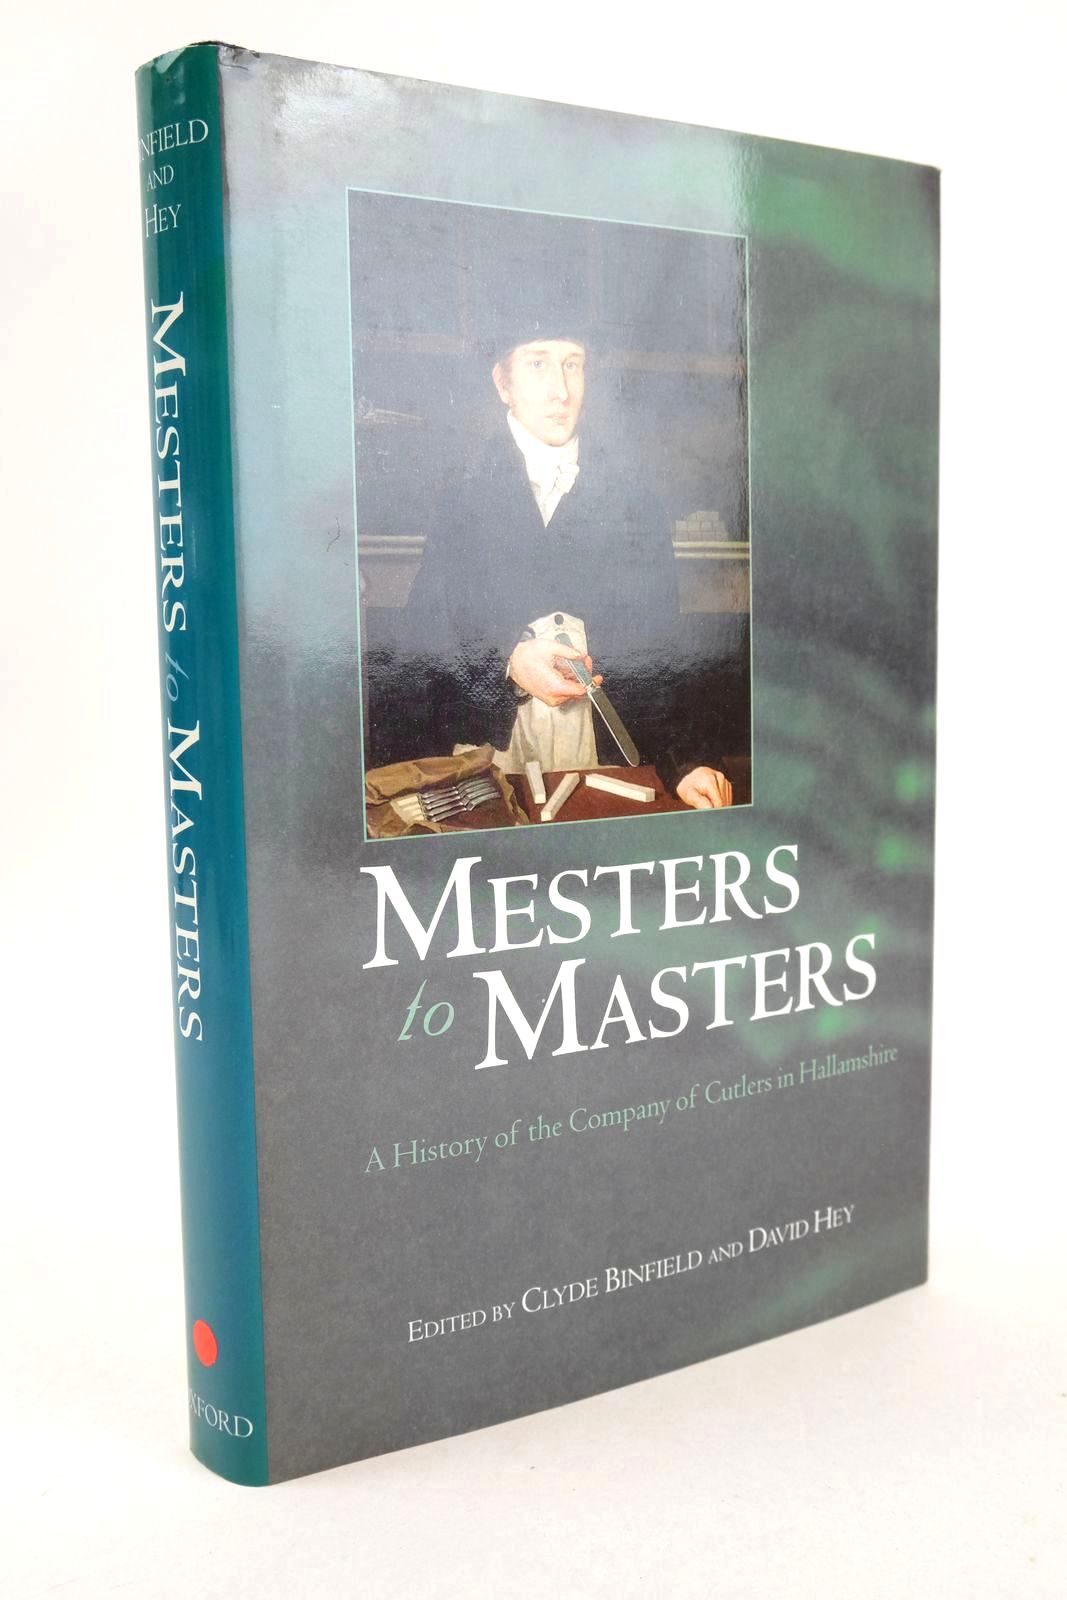 Photo of MESTERS TO MASTERS A HISTORY OF THE COMPANY OF CUTLERS IN HALLAMSHIRE- Stock Number: 1326498